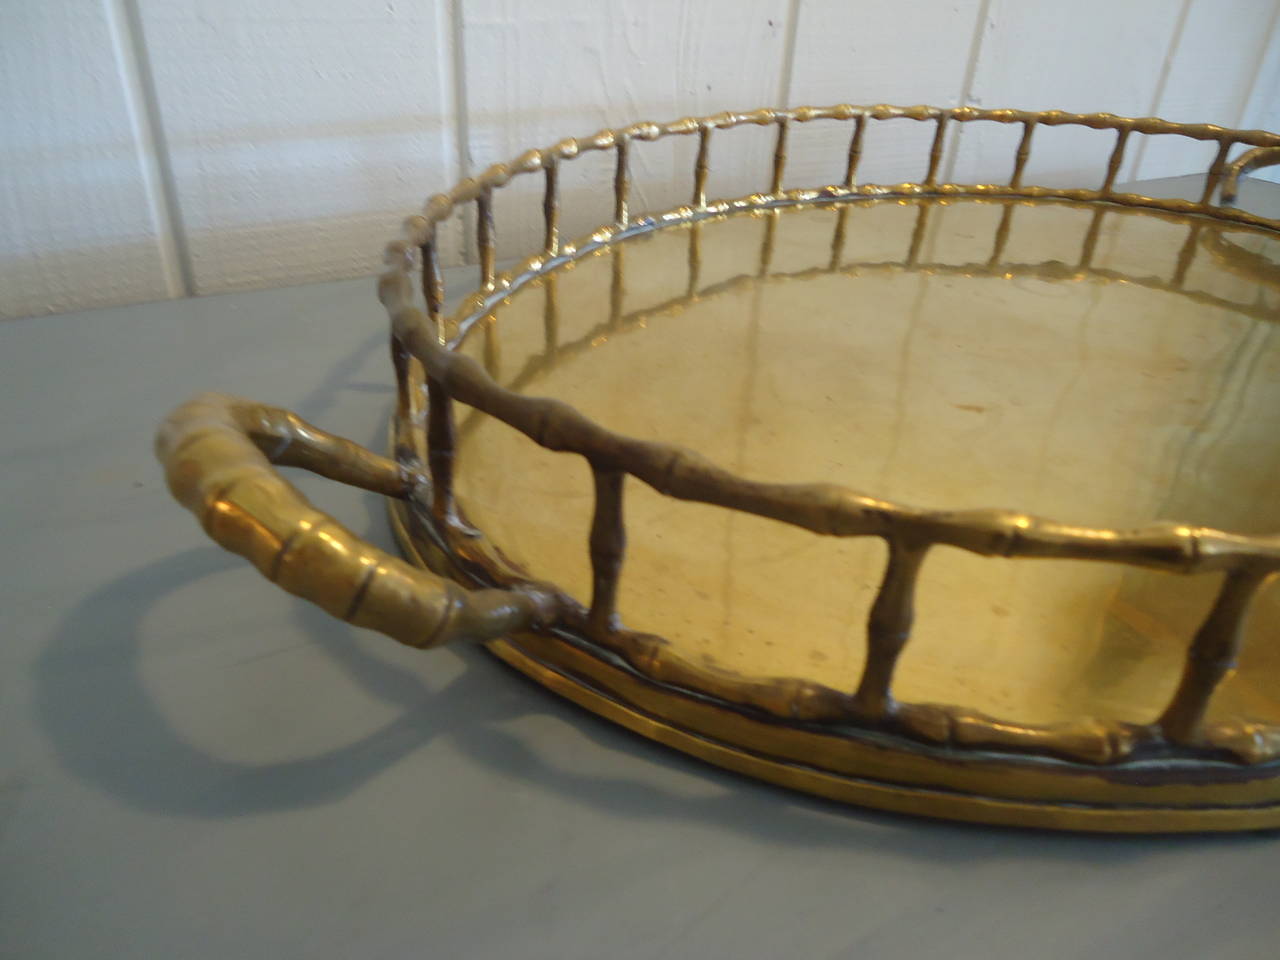 Large oval brass tray having faux bamboo motiffe and chunky decorative handles. Age appropriate patina.
Dimensions: Tray itself 23 L,
with handles 27.5 L.